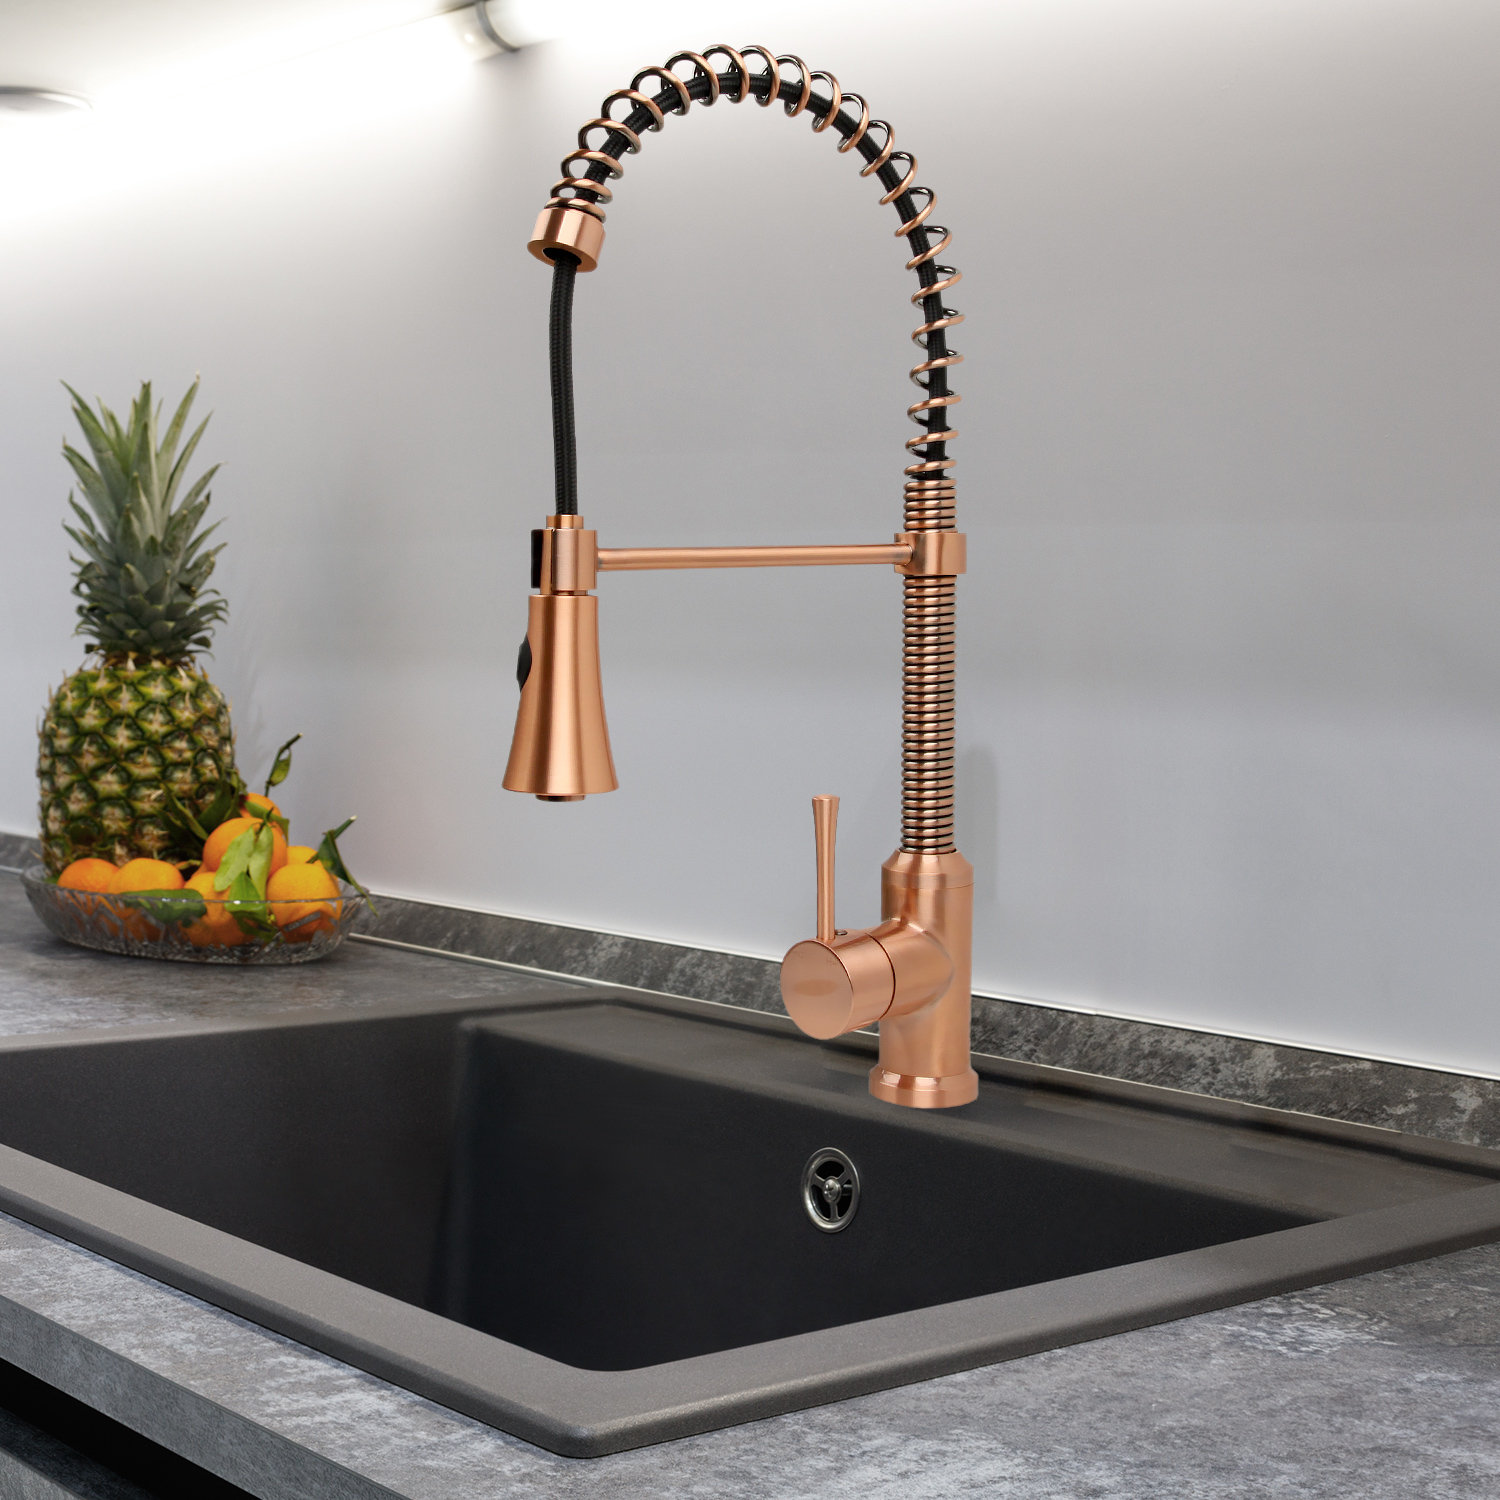 Copper Pull Out Kitchen Faucet, Single Level Solid Brass Kitchen Sink  Faucets With Pull Down Sprayer